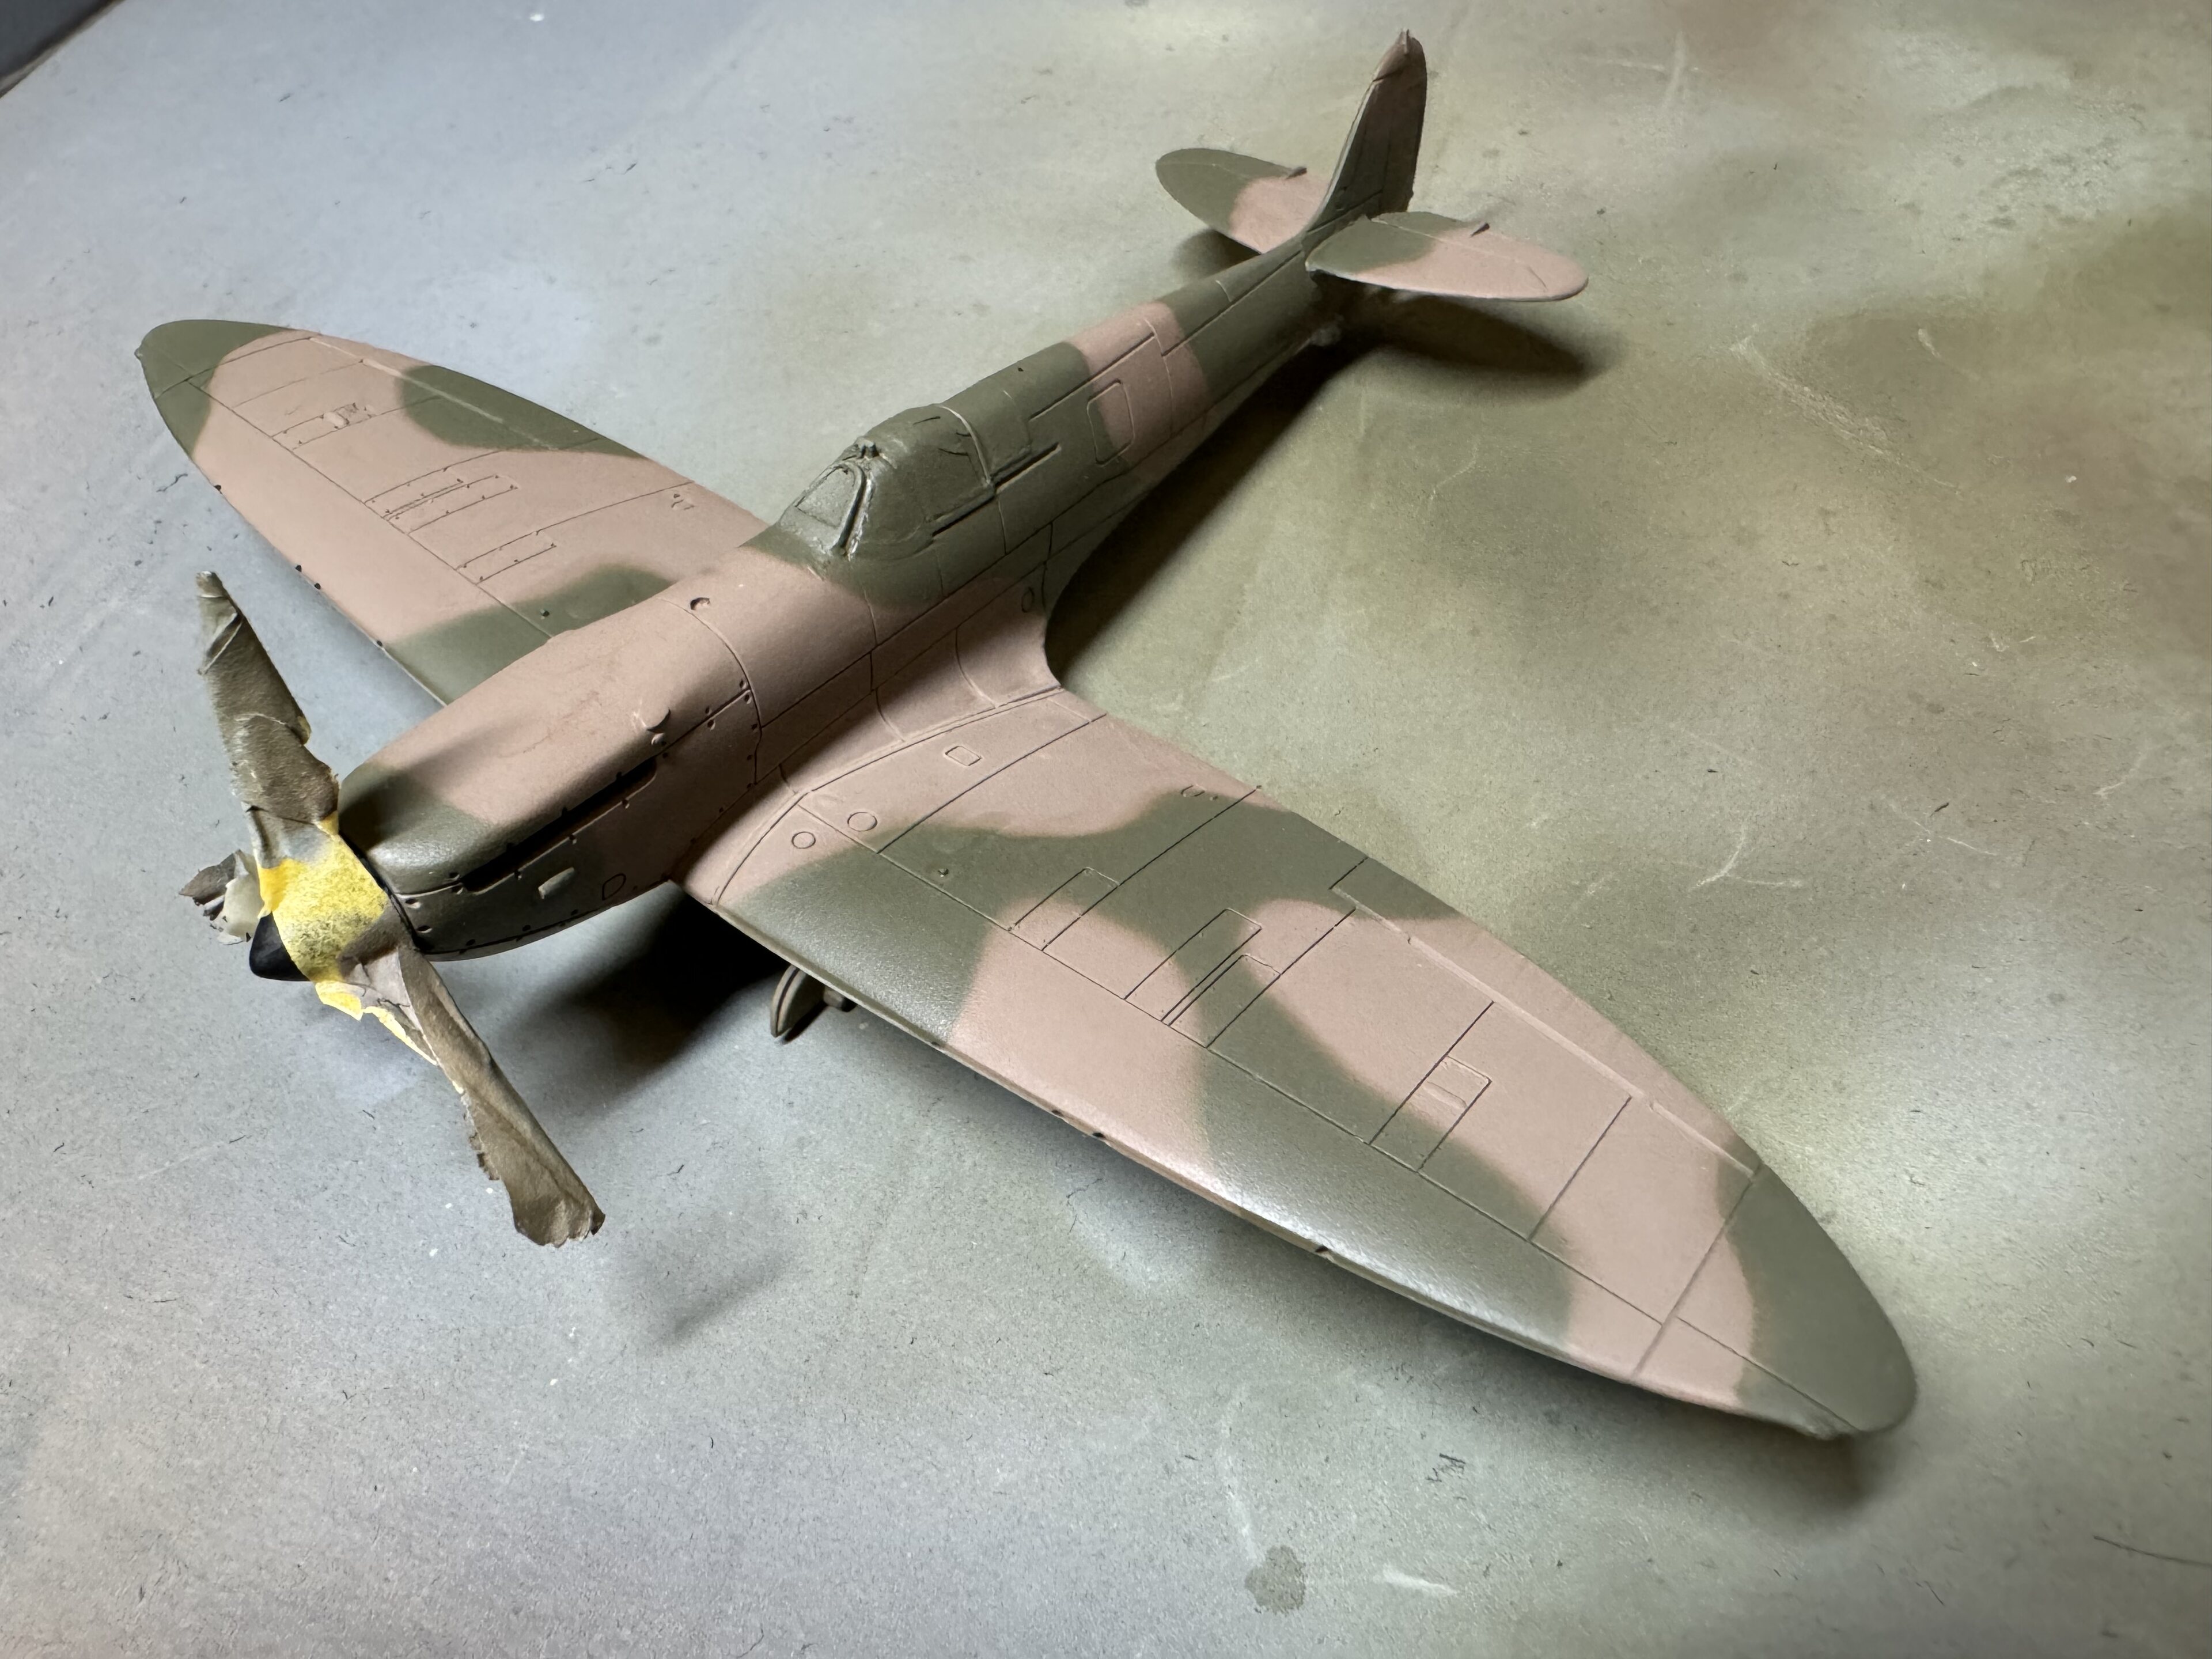 Pistonheads - The image shows a small model airplane, possibly a warplane, sitting on a surface. It is painted to resemble the camouflage patterns of a military aircraft, with shades of green, brown, and grey. The plane has a detailed design, with visible wings, a propeller, and other distinguishing features. In front of the airplane, there appears to be a small figure or model person, also dressed in camouflage clothing, giving the impression that they are piloting the aircraft.